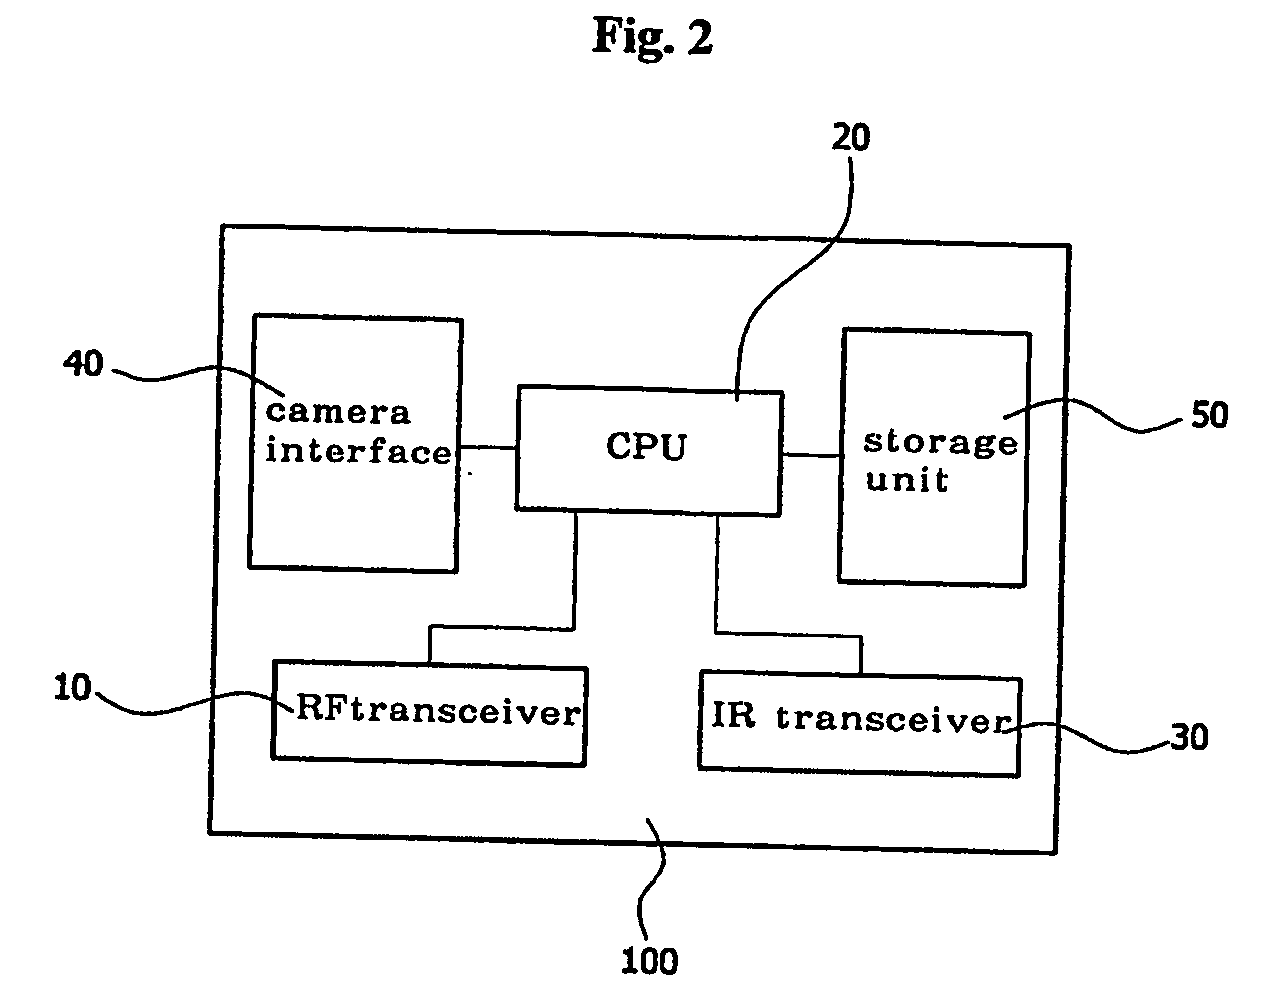 System and method for home automation using wireless control rf remocon module based on network